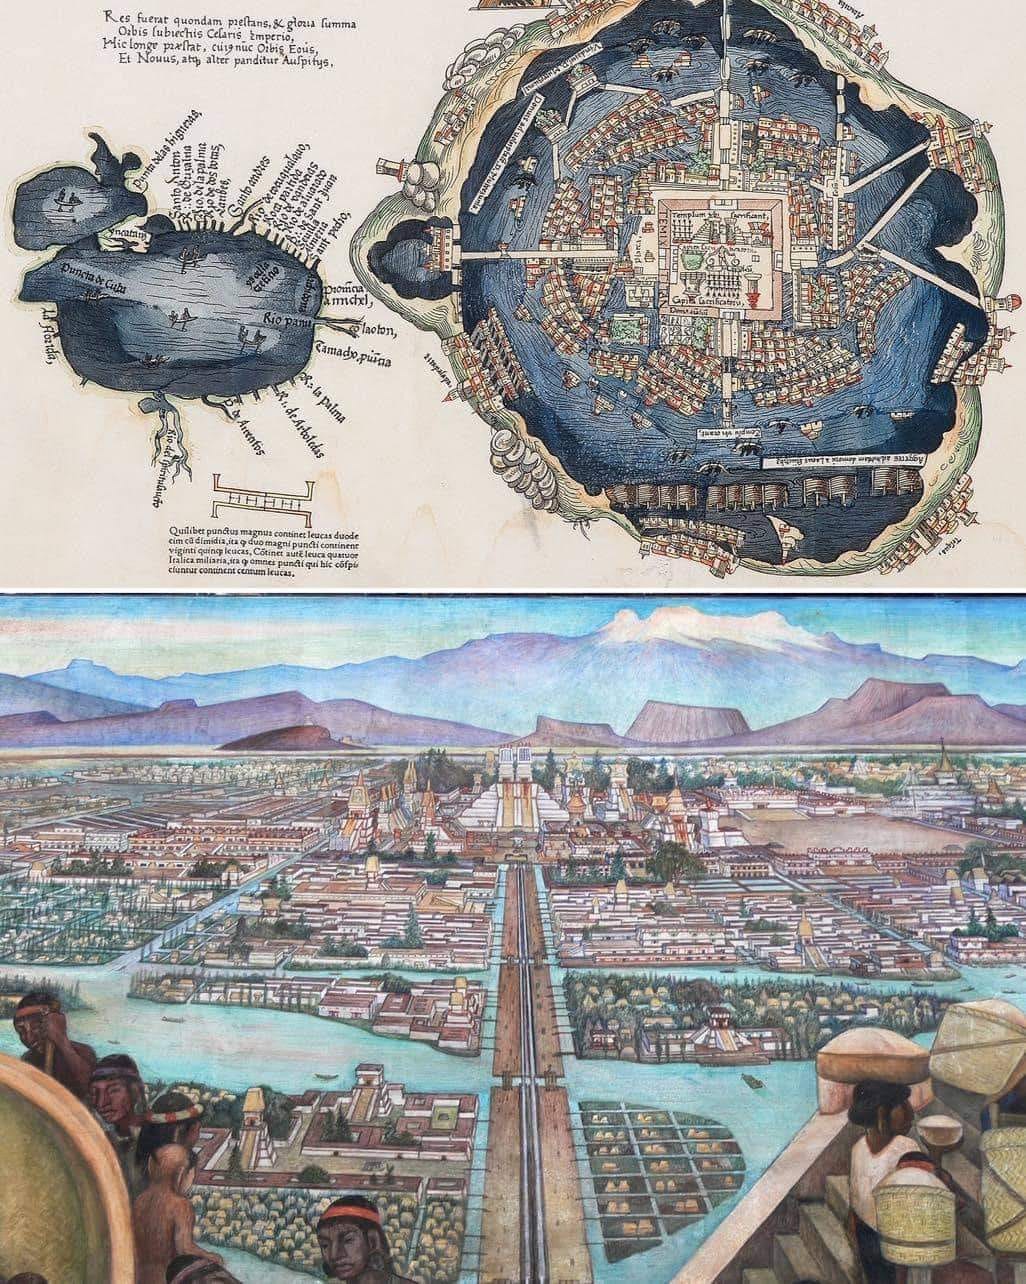 The First European Map Of Tenochtitlan, 1524: Bridging Two Worlds